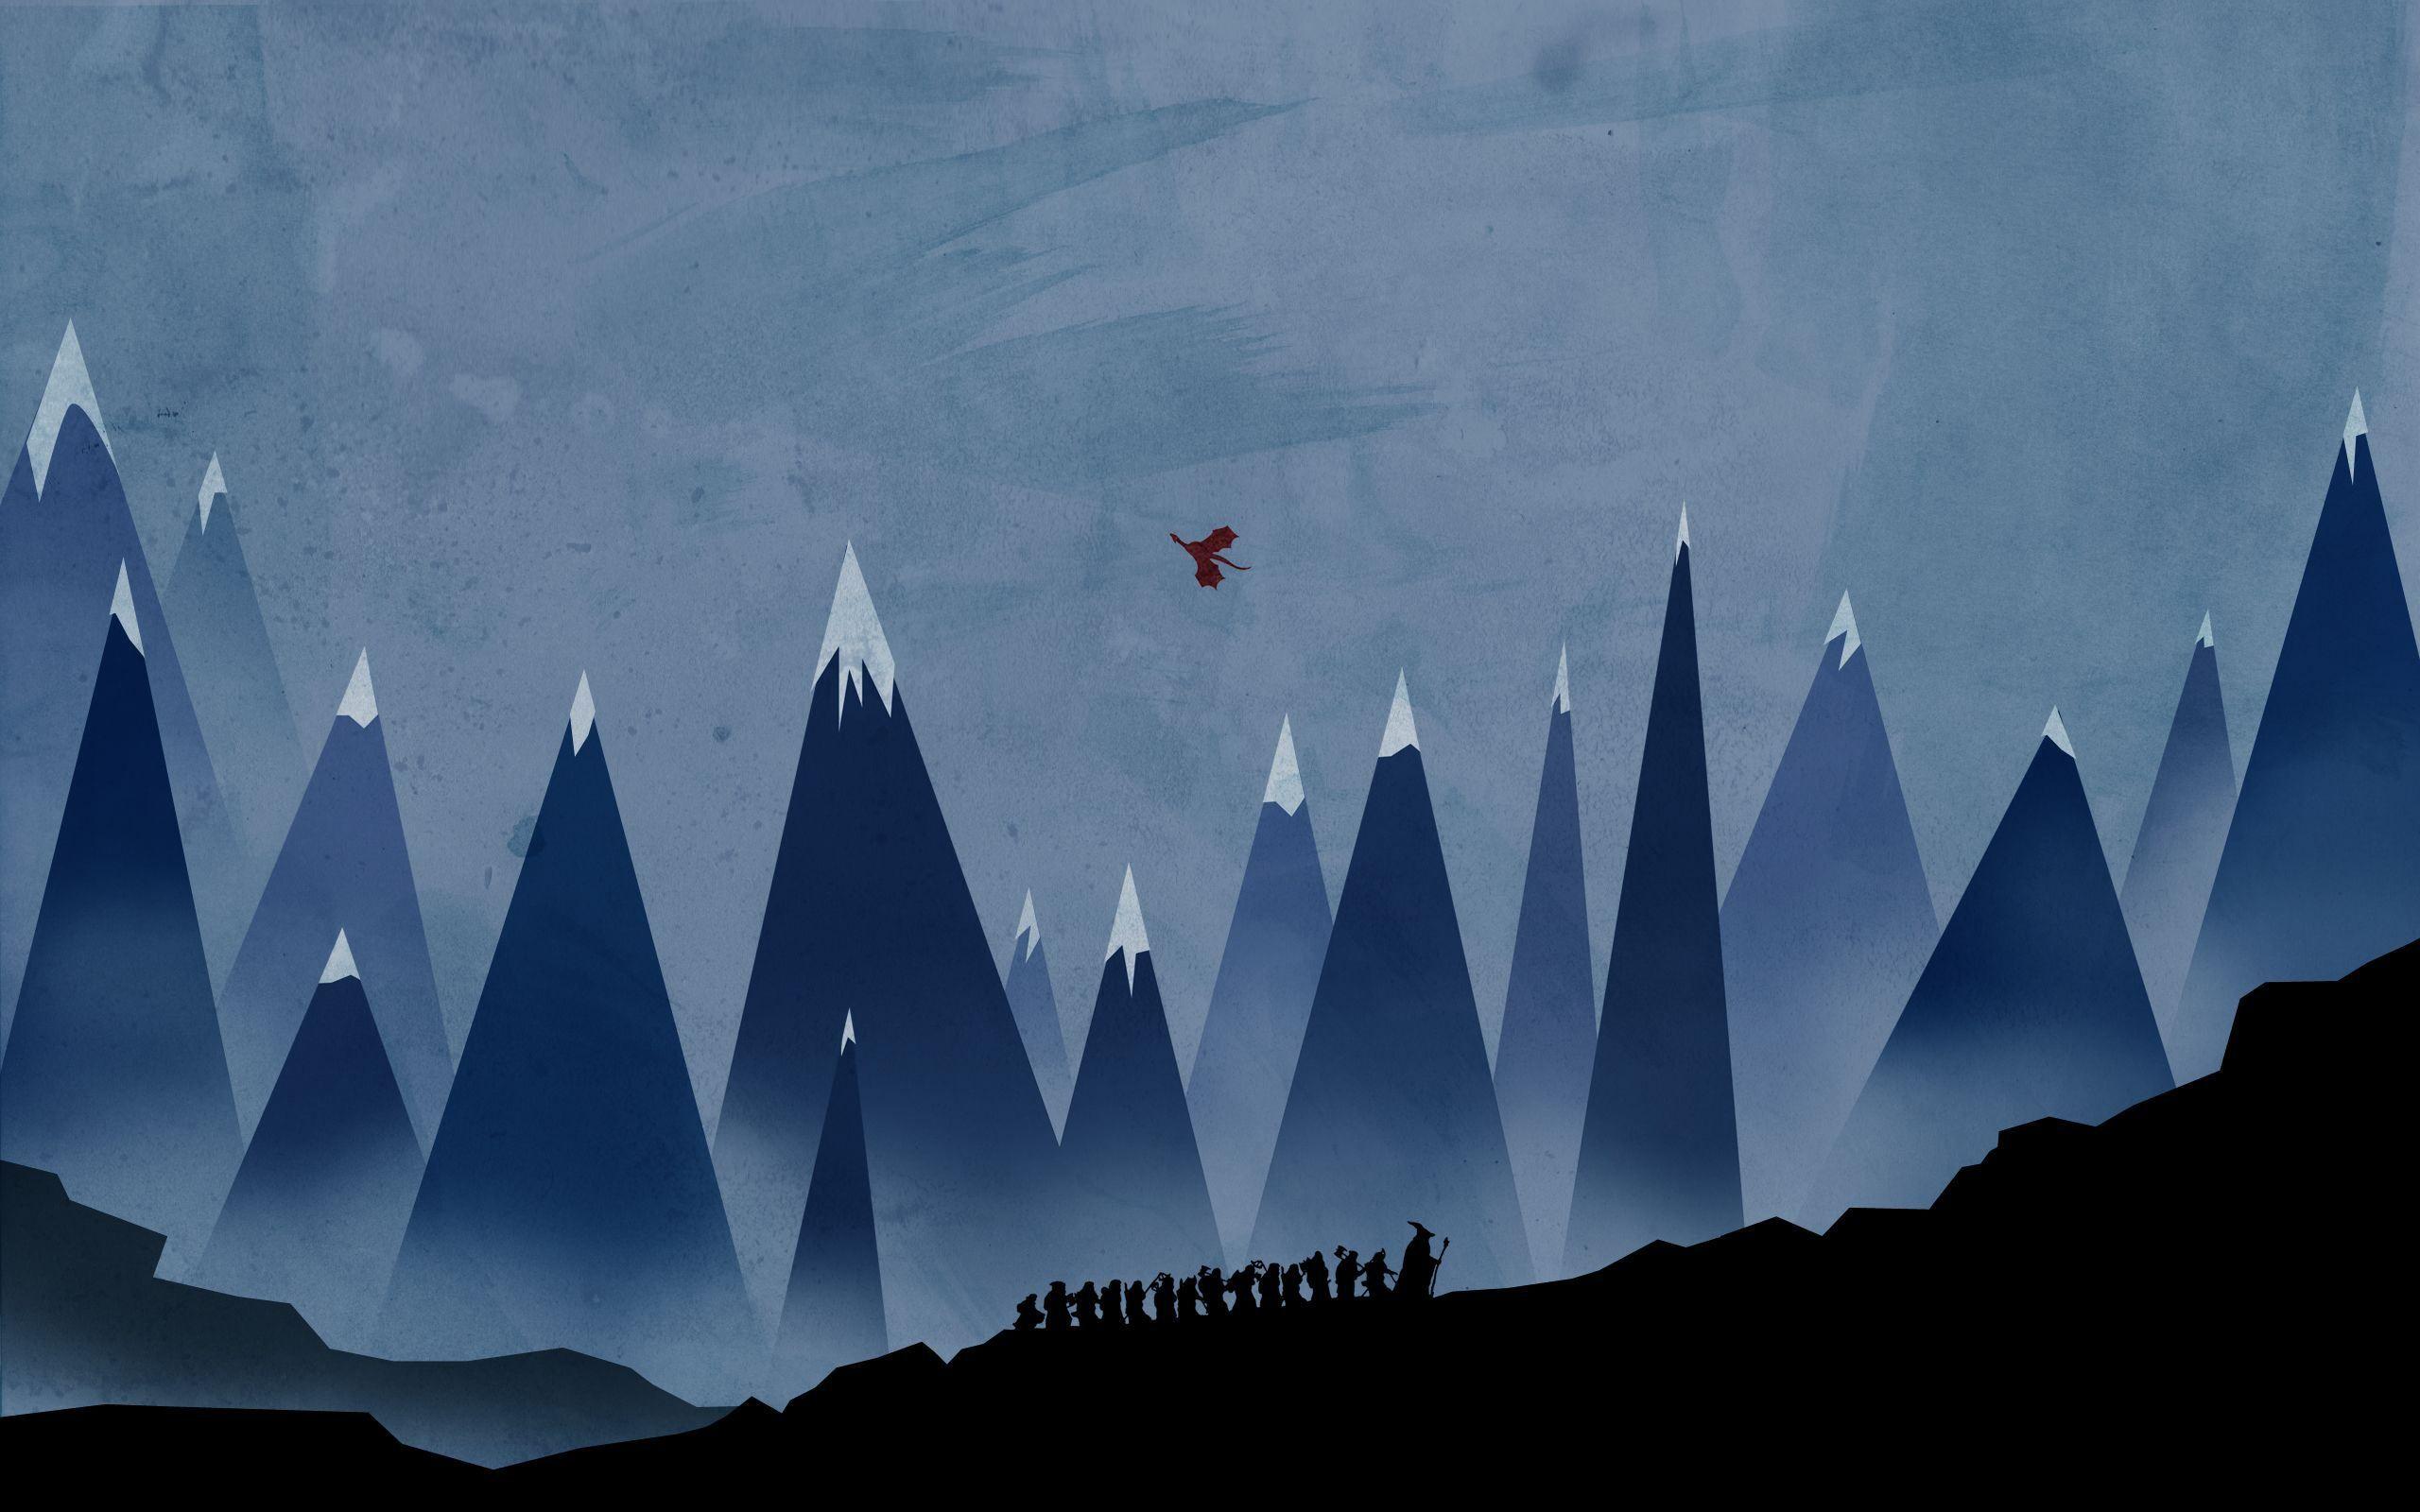 Lord Of The Rings Wallpaper Full HD. Minimalist wallpaper, The hobbit, Hobbit an unexpected journey